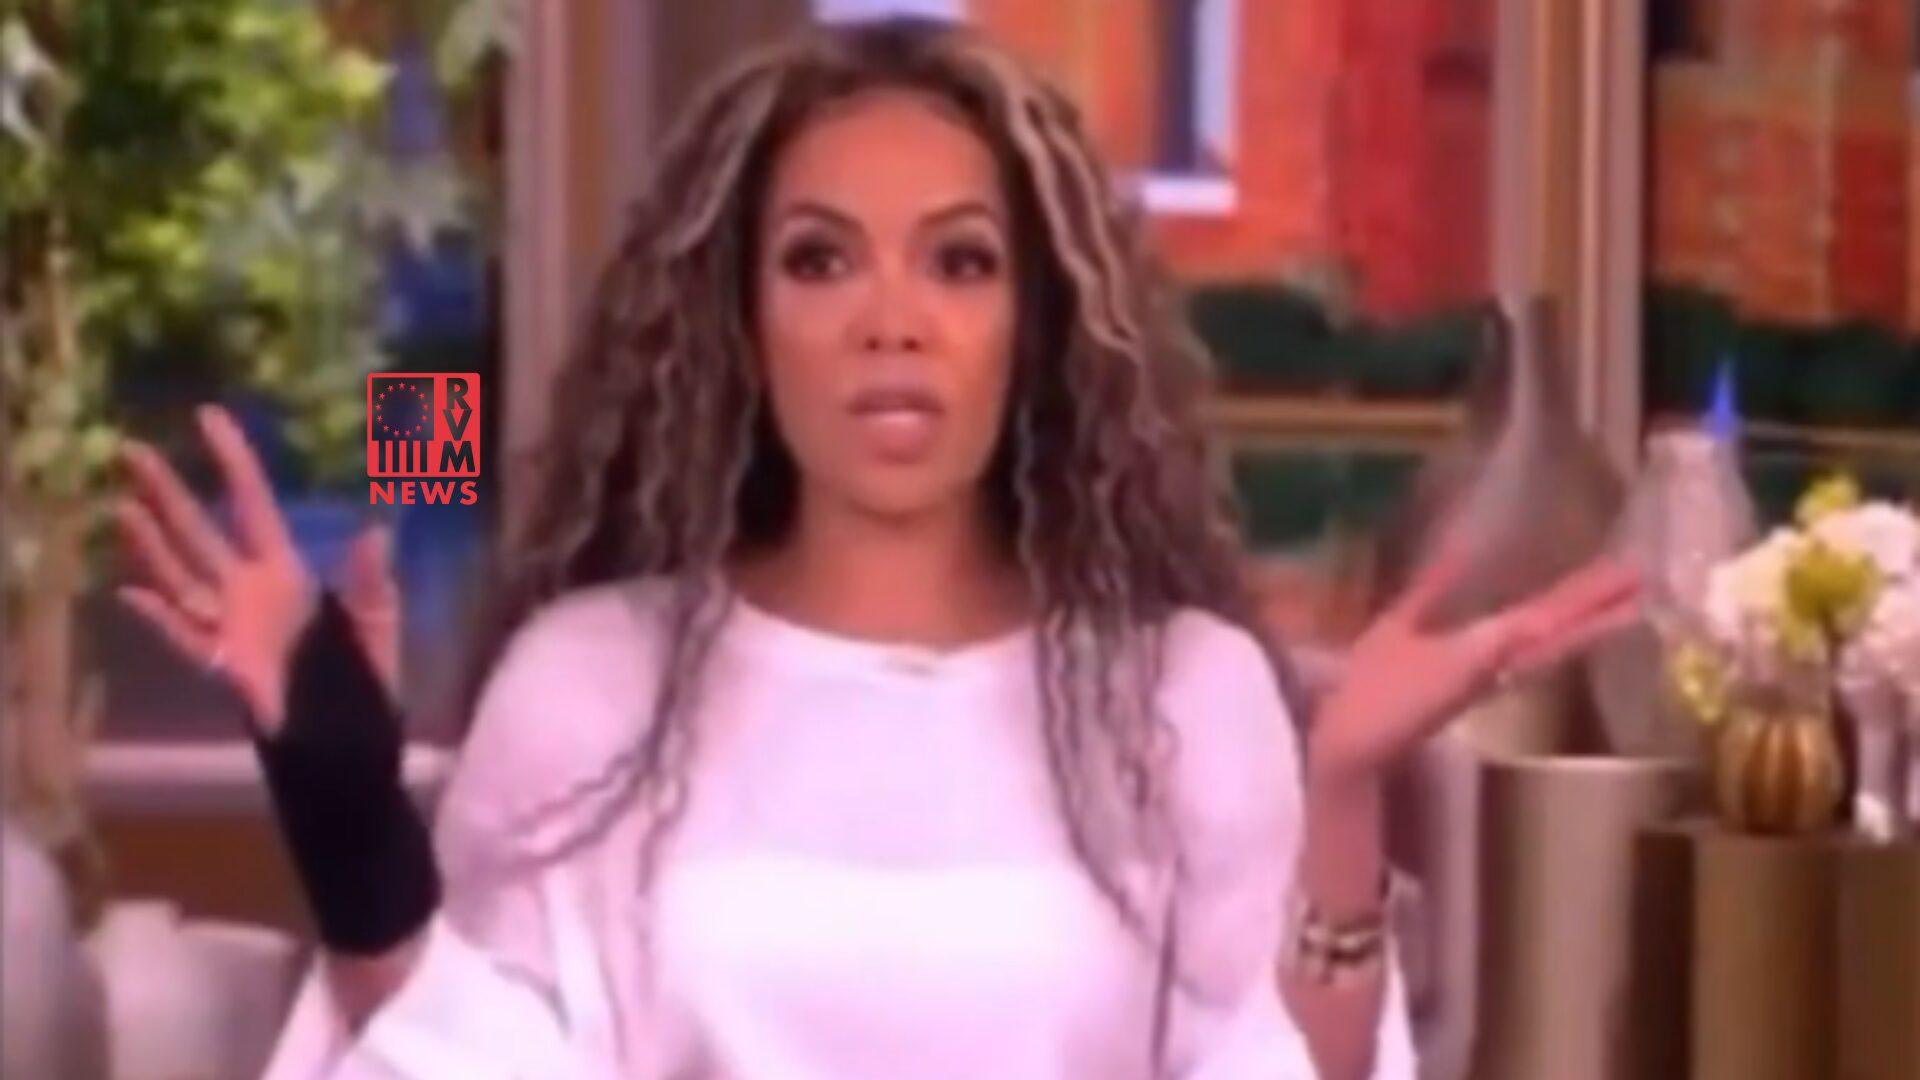 Sunny Hostin’s Climate Change Views Prove She’s the Dumbest Member of “The View” [VIDEO]